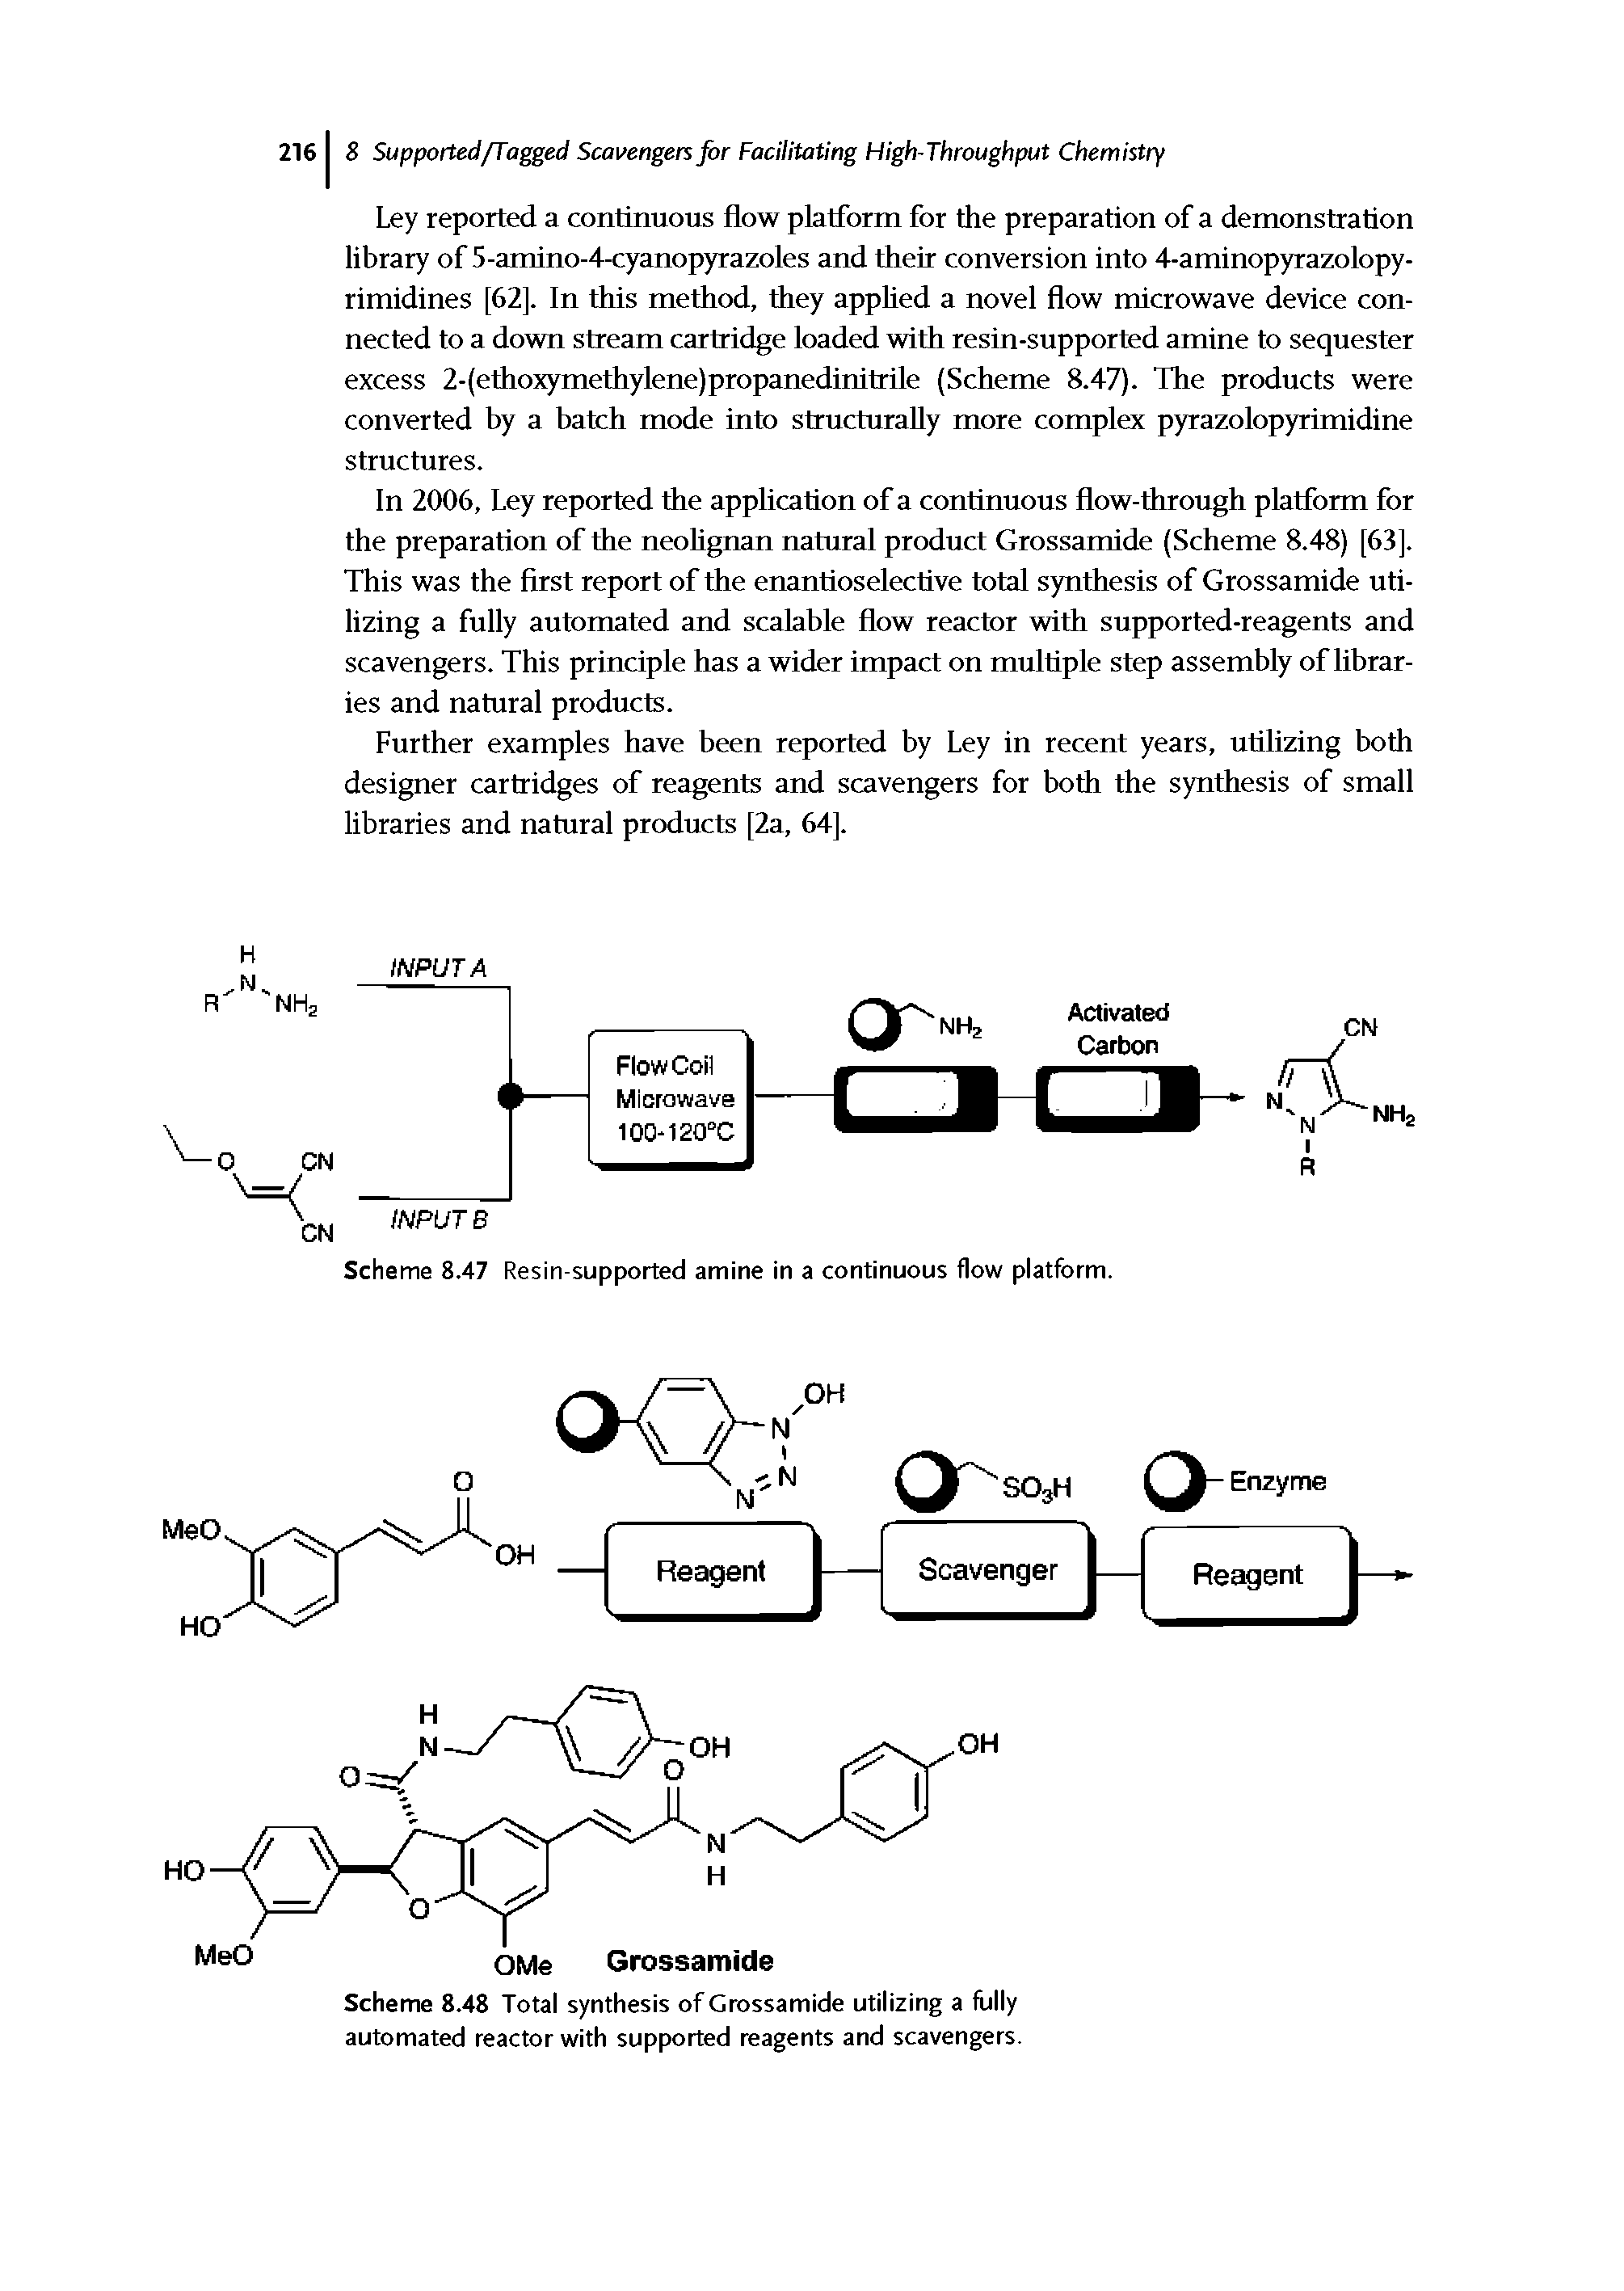 Scheme 8.48 Total synthesis of Grossamide utilizing a fully automated reactor with supported reagents and scavengers.